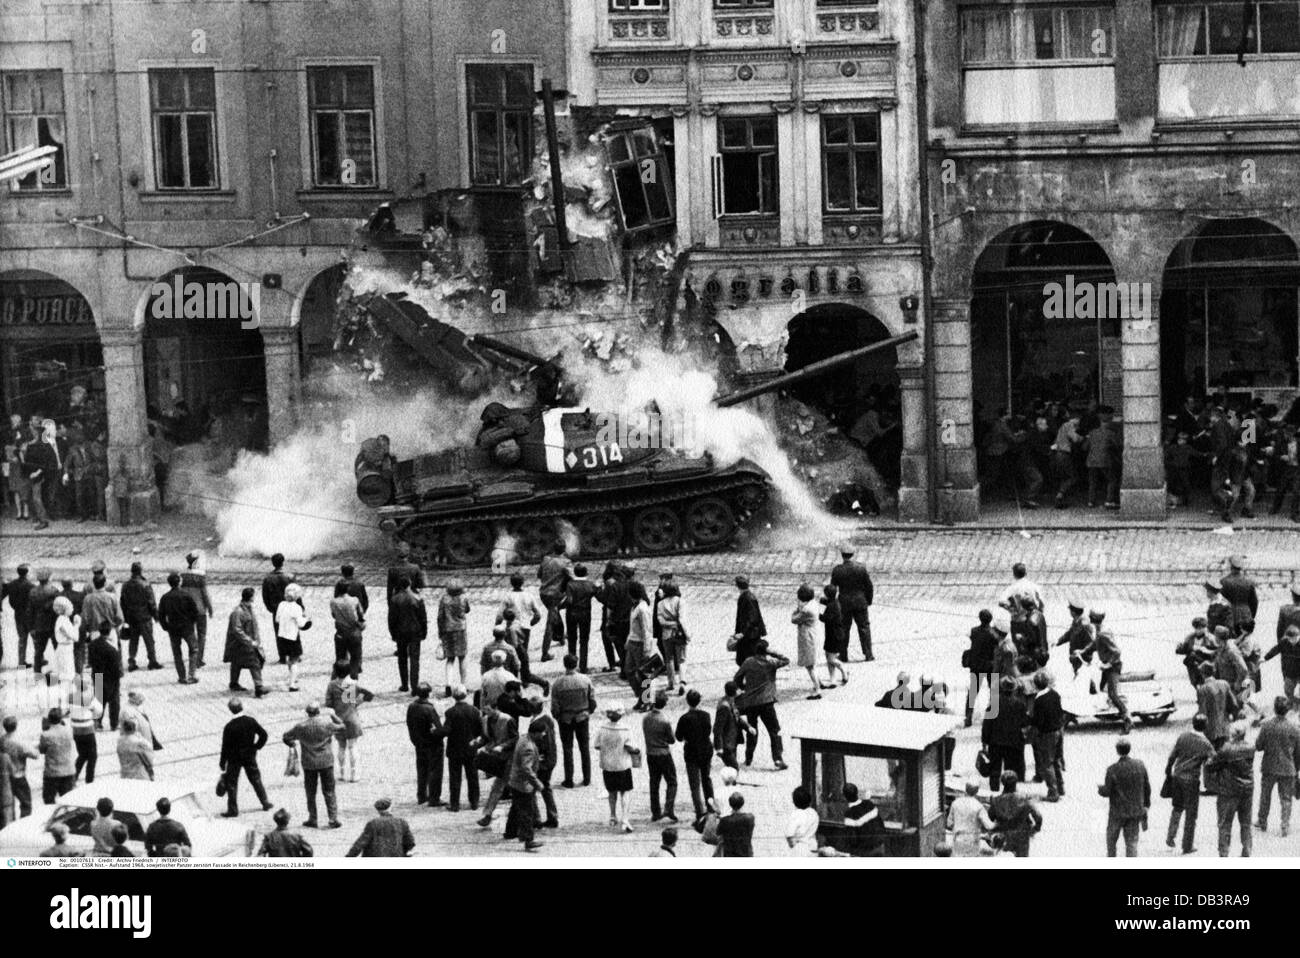 geography/travel, Czechia, Prague Spring, 1968, occupation by Warsaw Pact forces 21.8.1968 - 23.8.1968, Soviet tank destroying a claddng in Liberec, 21.8.1968, CSSR, Czechoslovakia, military, soldiers, politics, 20th century, historic, historical, people, crowd, crowds, 1960s, Additional-Rights-Clearences-Not Available Stock Photo